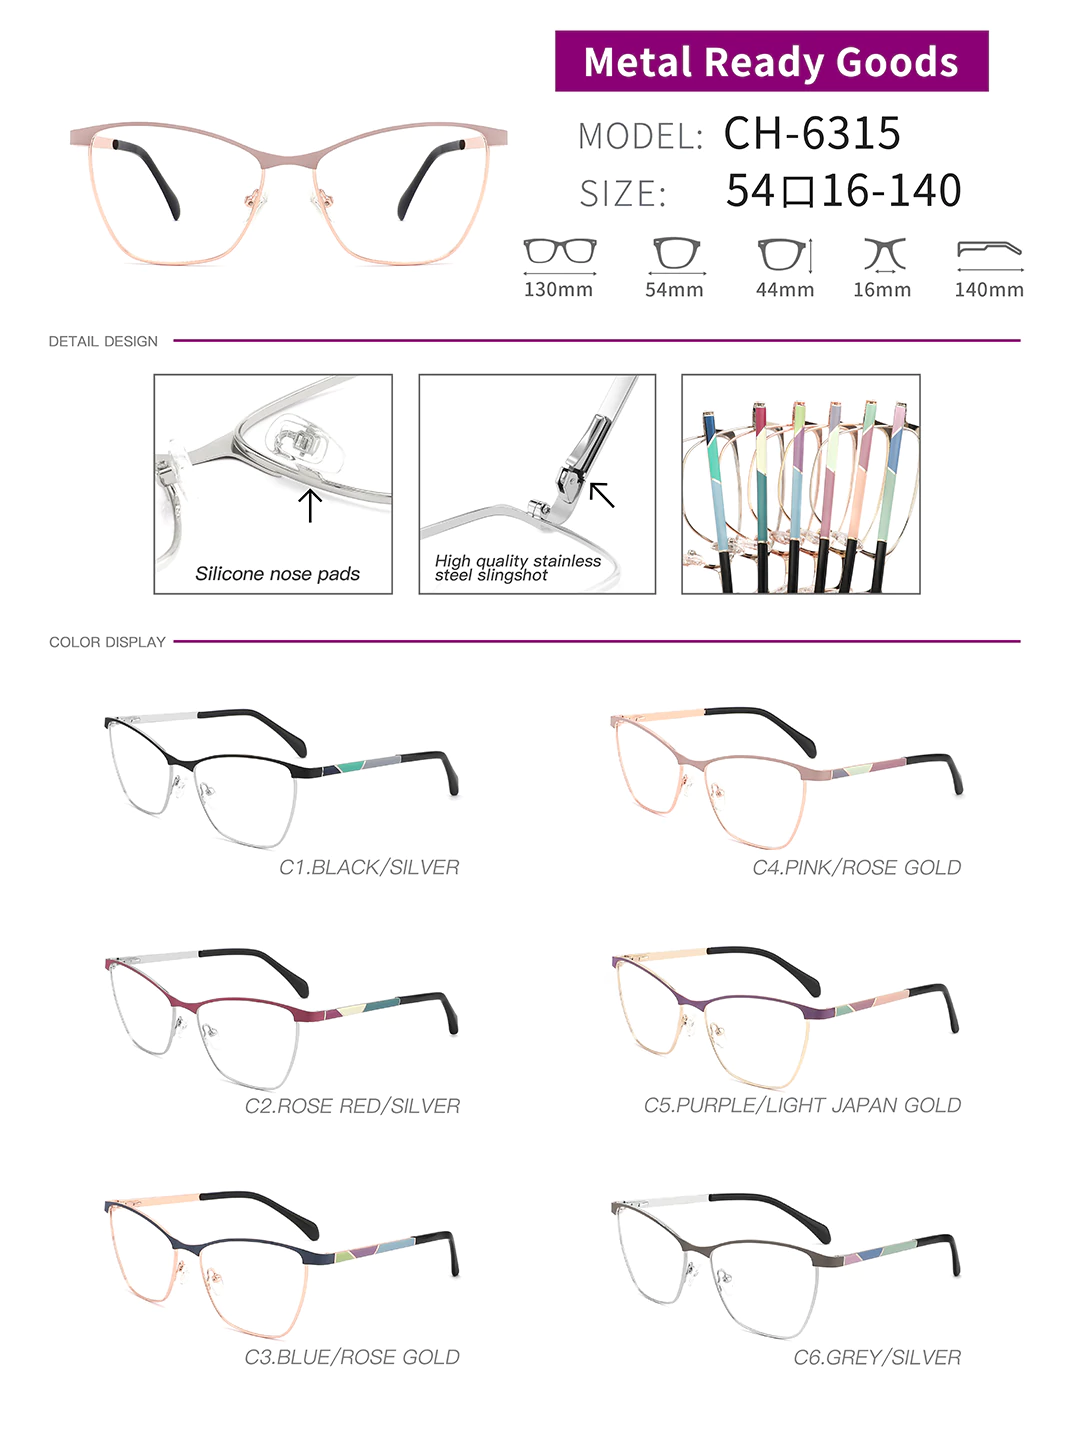 3D printed glasses CH-6315 in different colors, sizes and detail shots